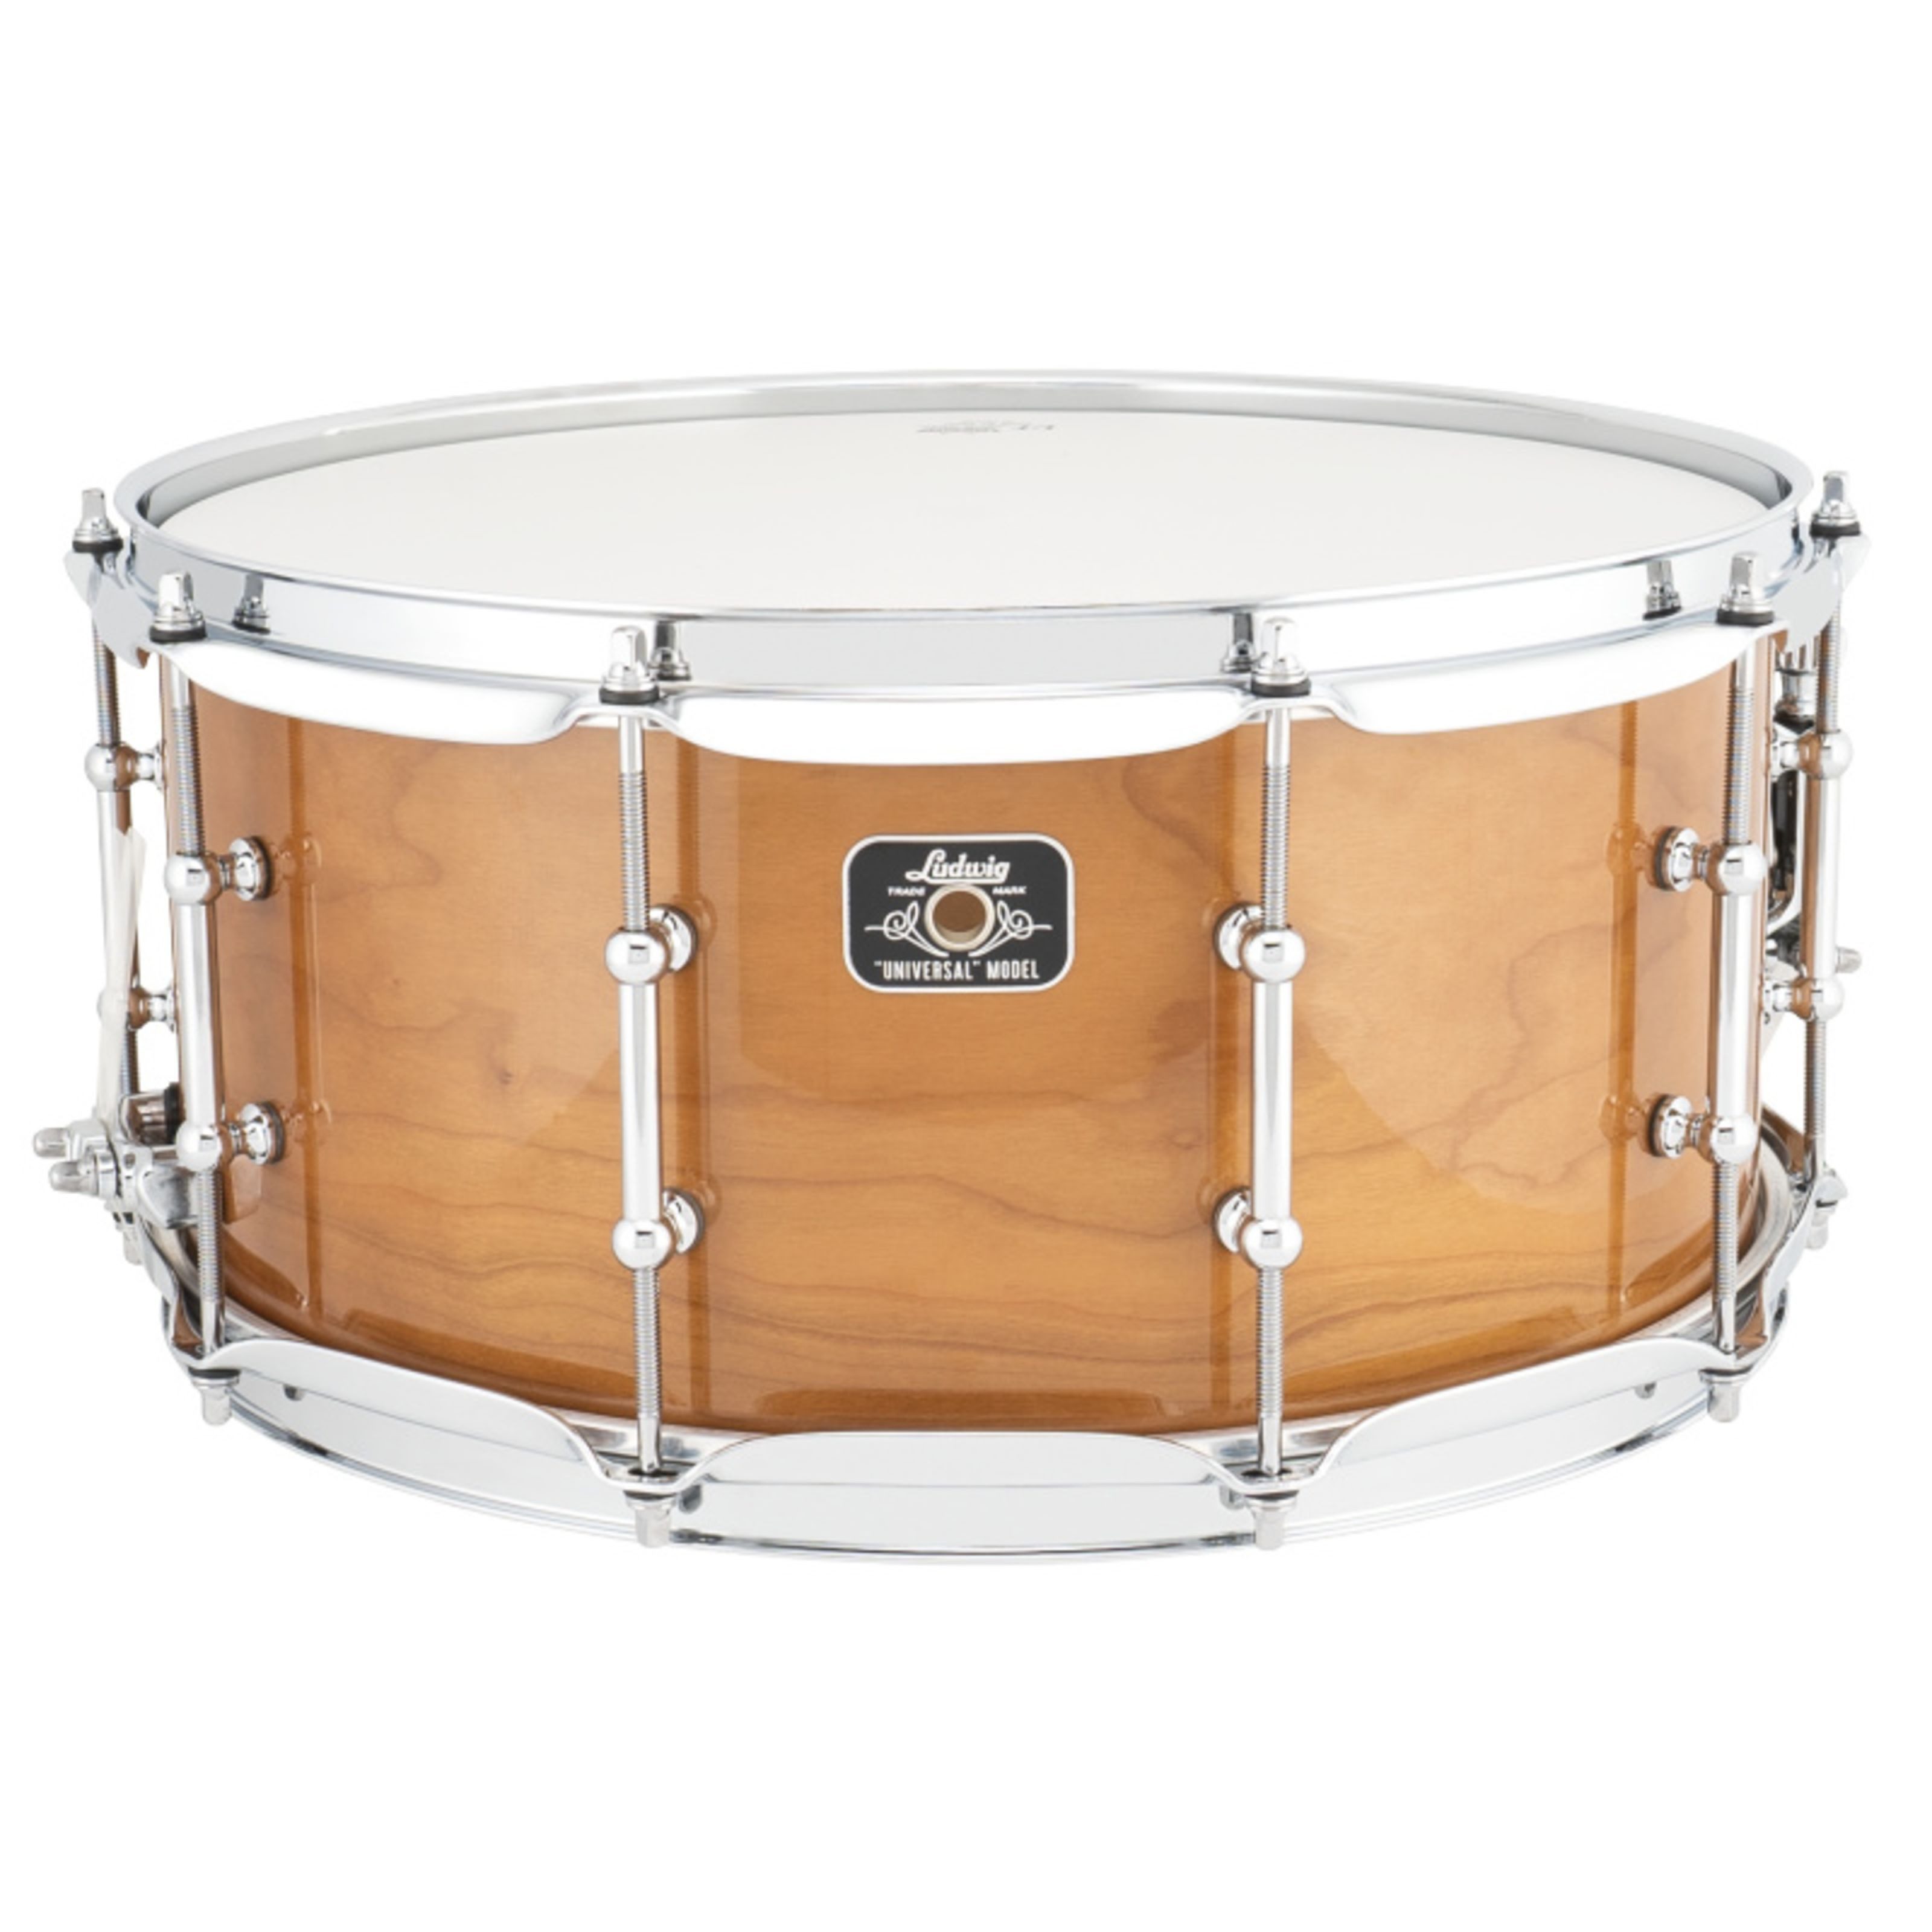 Ludwig Snare Drum, Schlagzeuge, Snare Drums, LU6514CH Universal Cherry Snare 14"x6,5" - Snare Drum